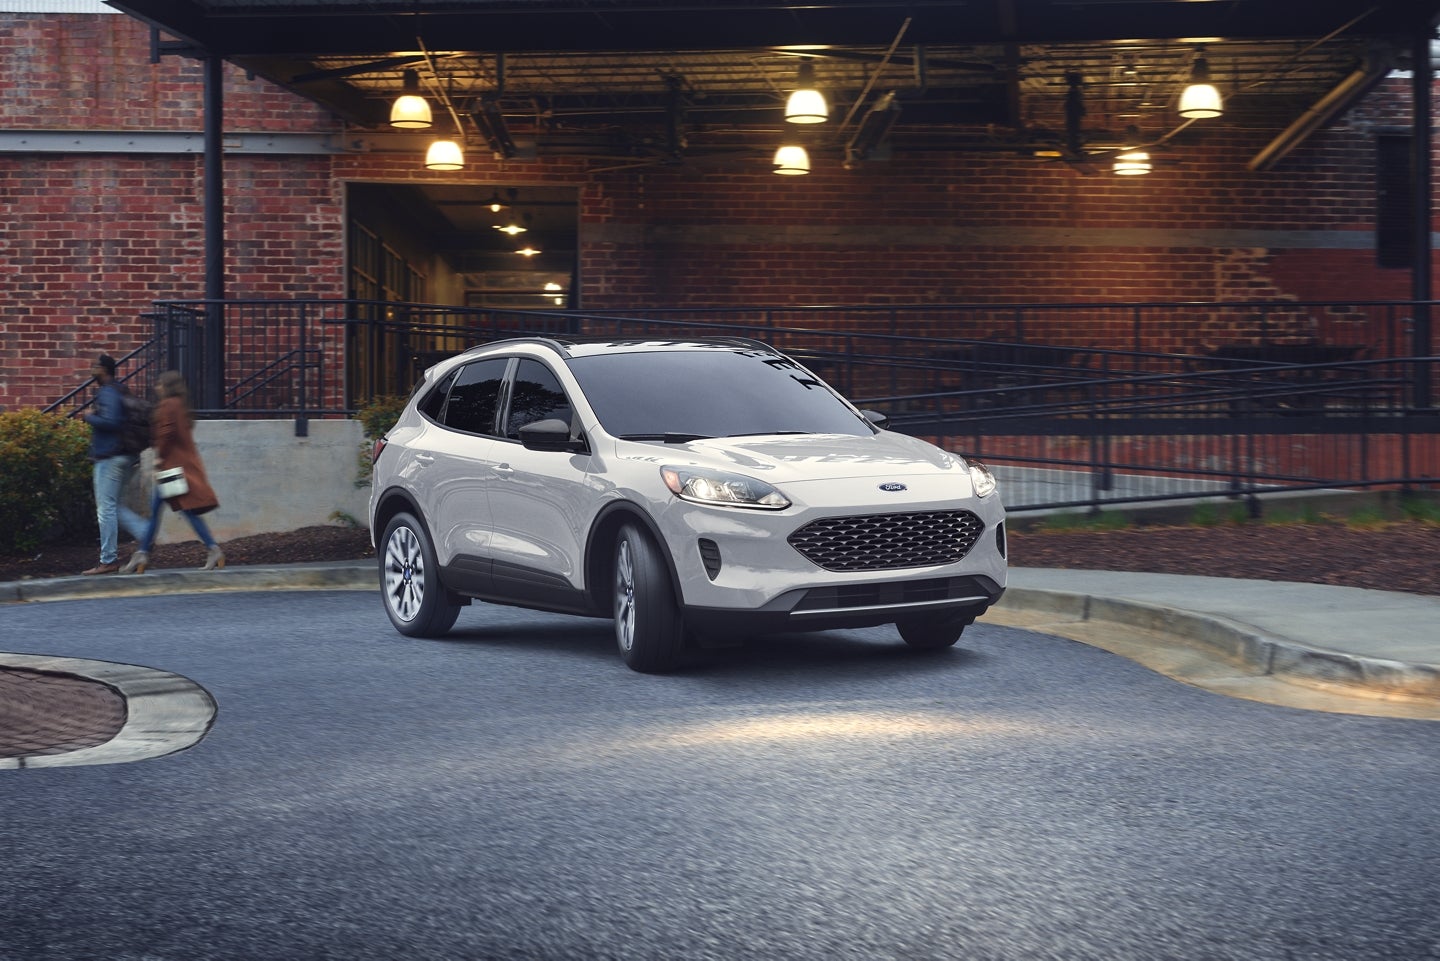 2020 Ford Escape Key Features near Fort Rucker, AL